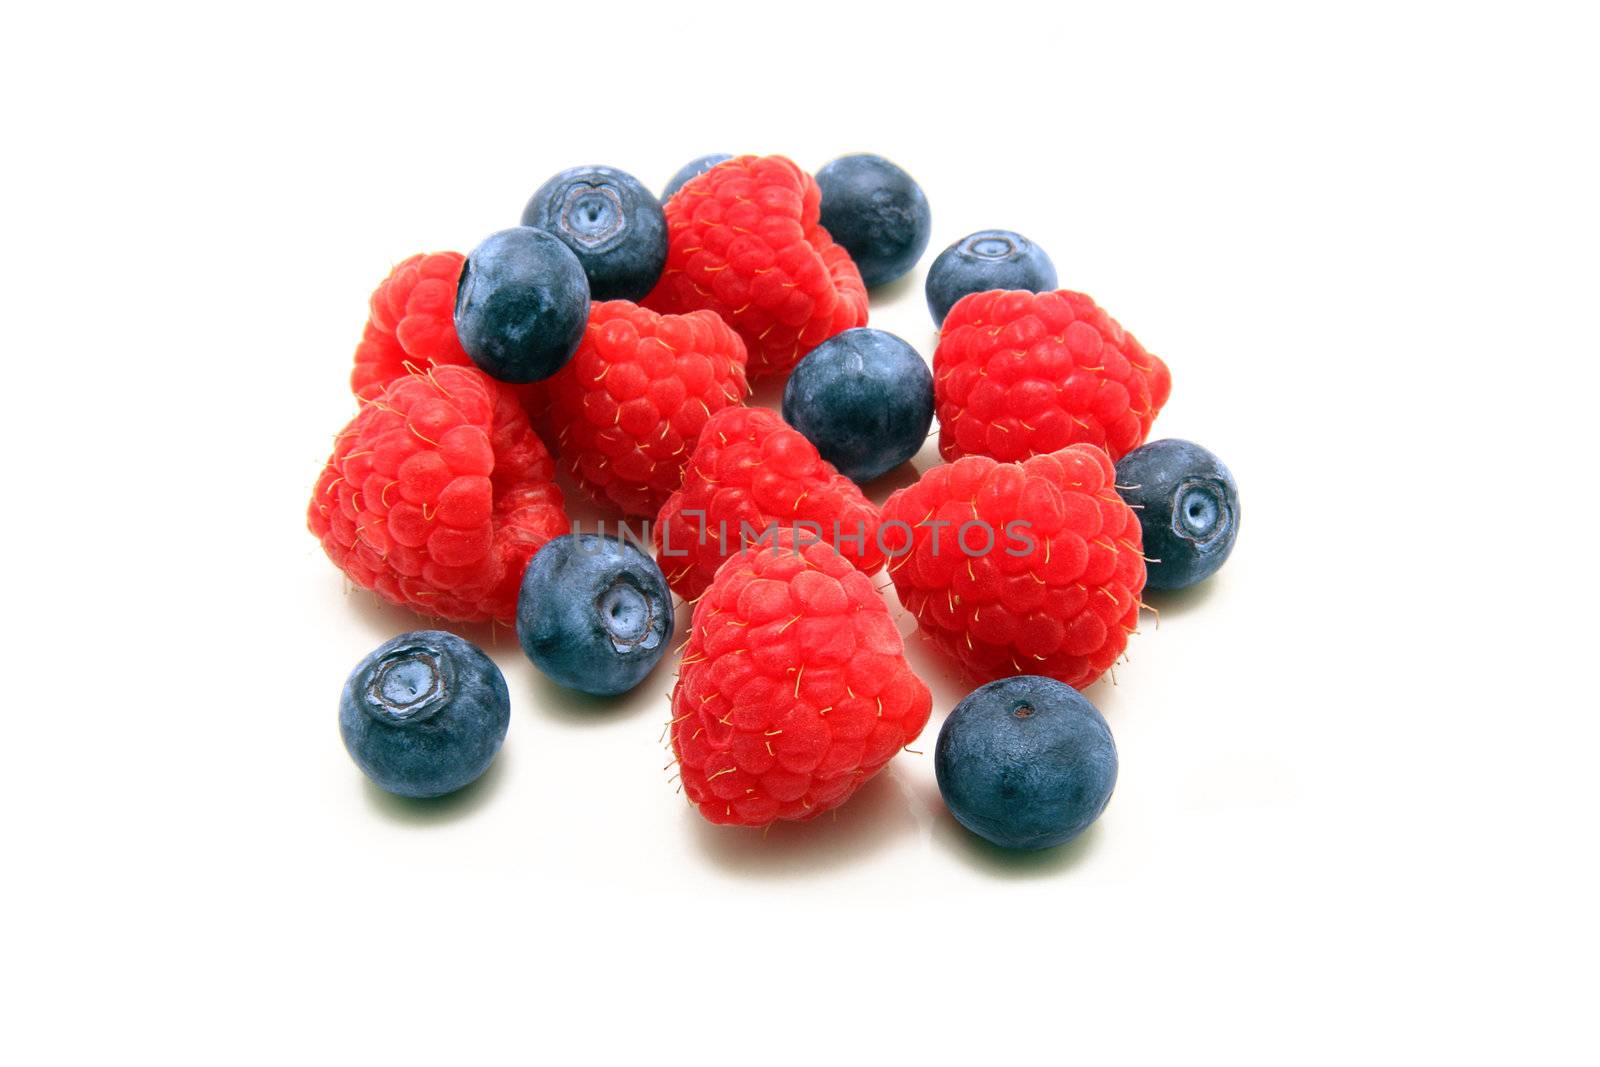 A bunch of plump delicious raspberries and blueberries isolated on white